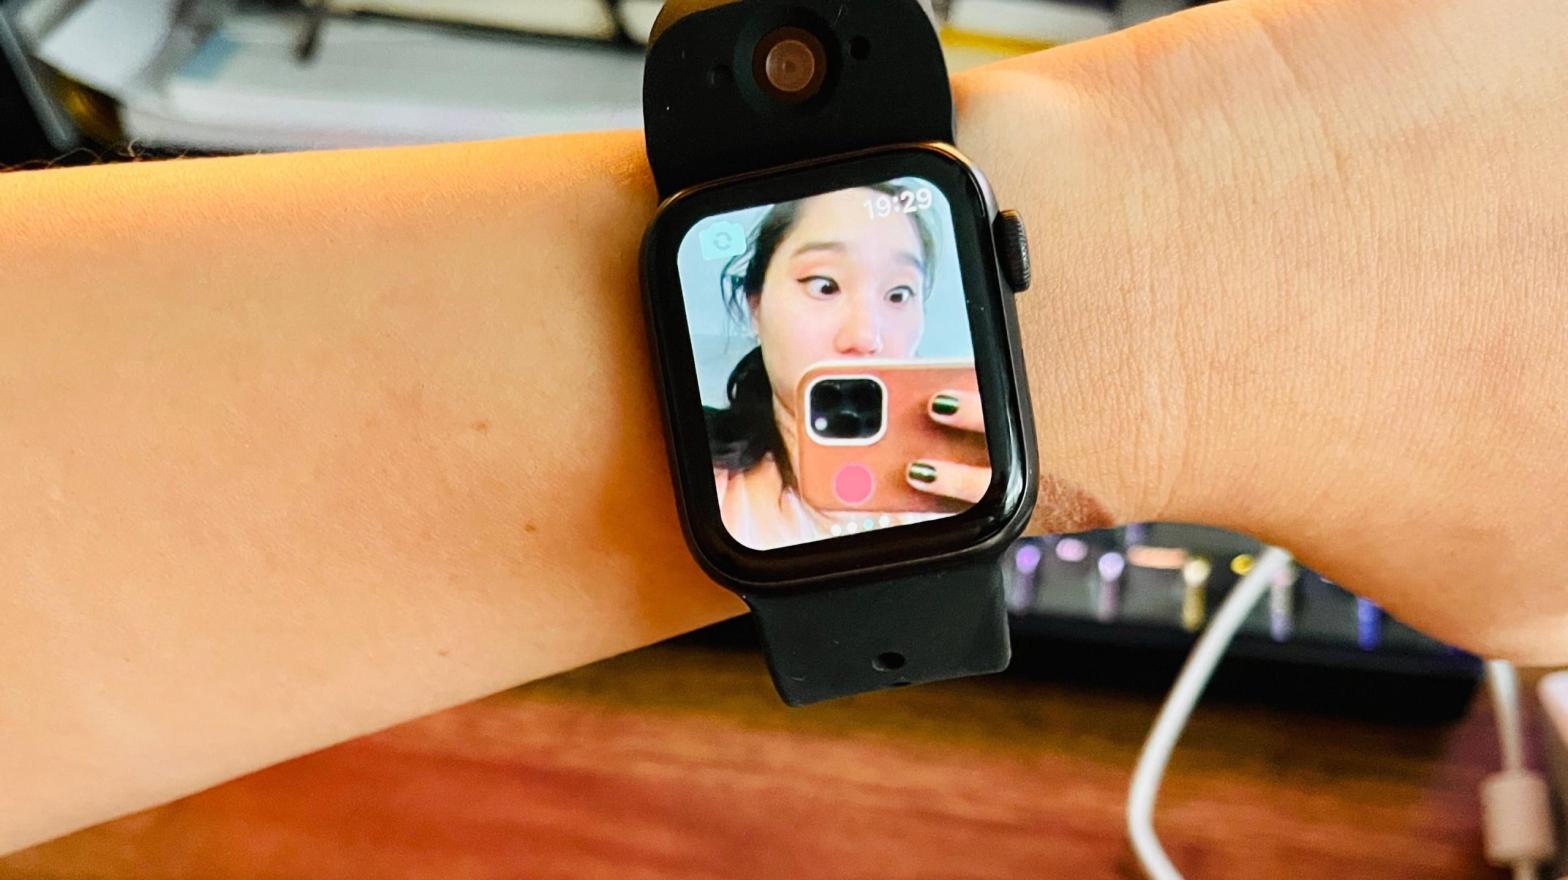 Picture quality isn't the best, but it's good enough for the Apple Watch's screen. (Photo: Victoria Song/Gizmodo)